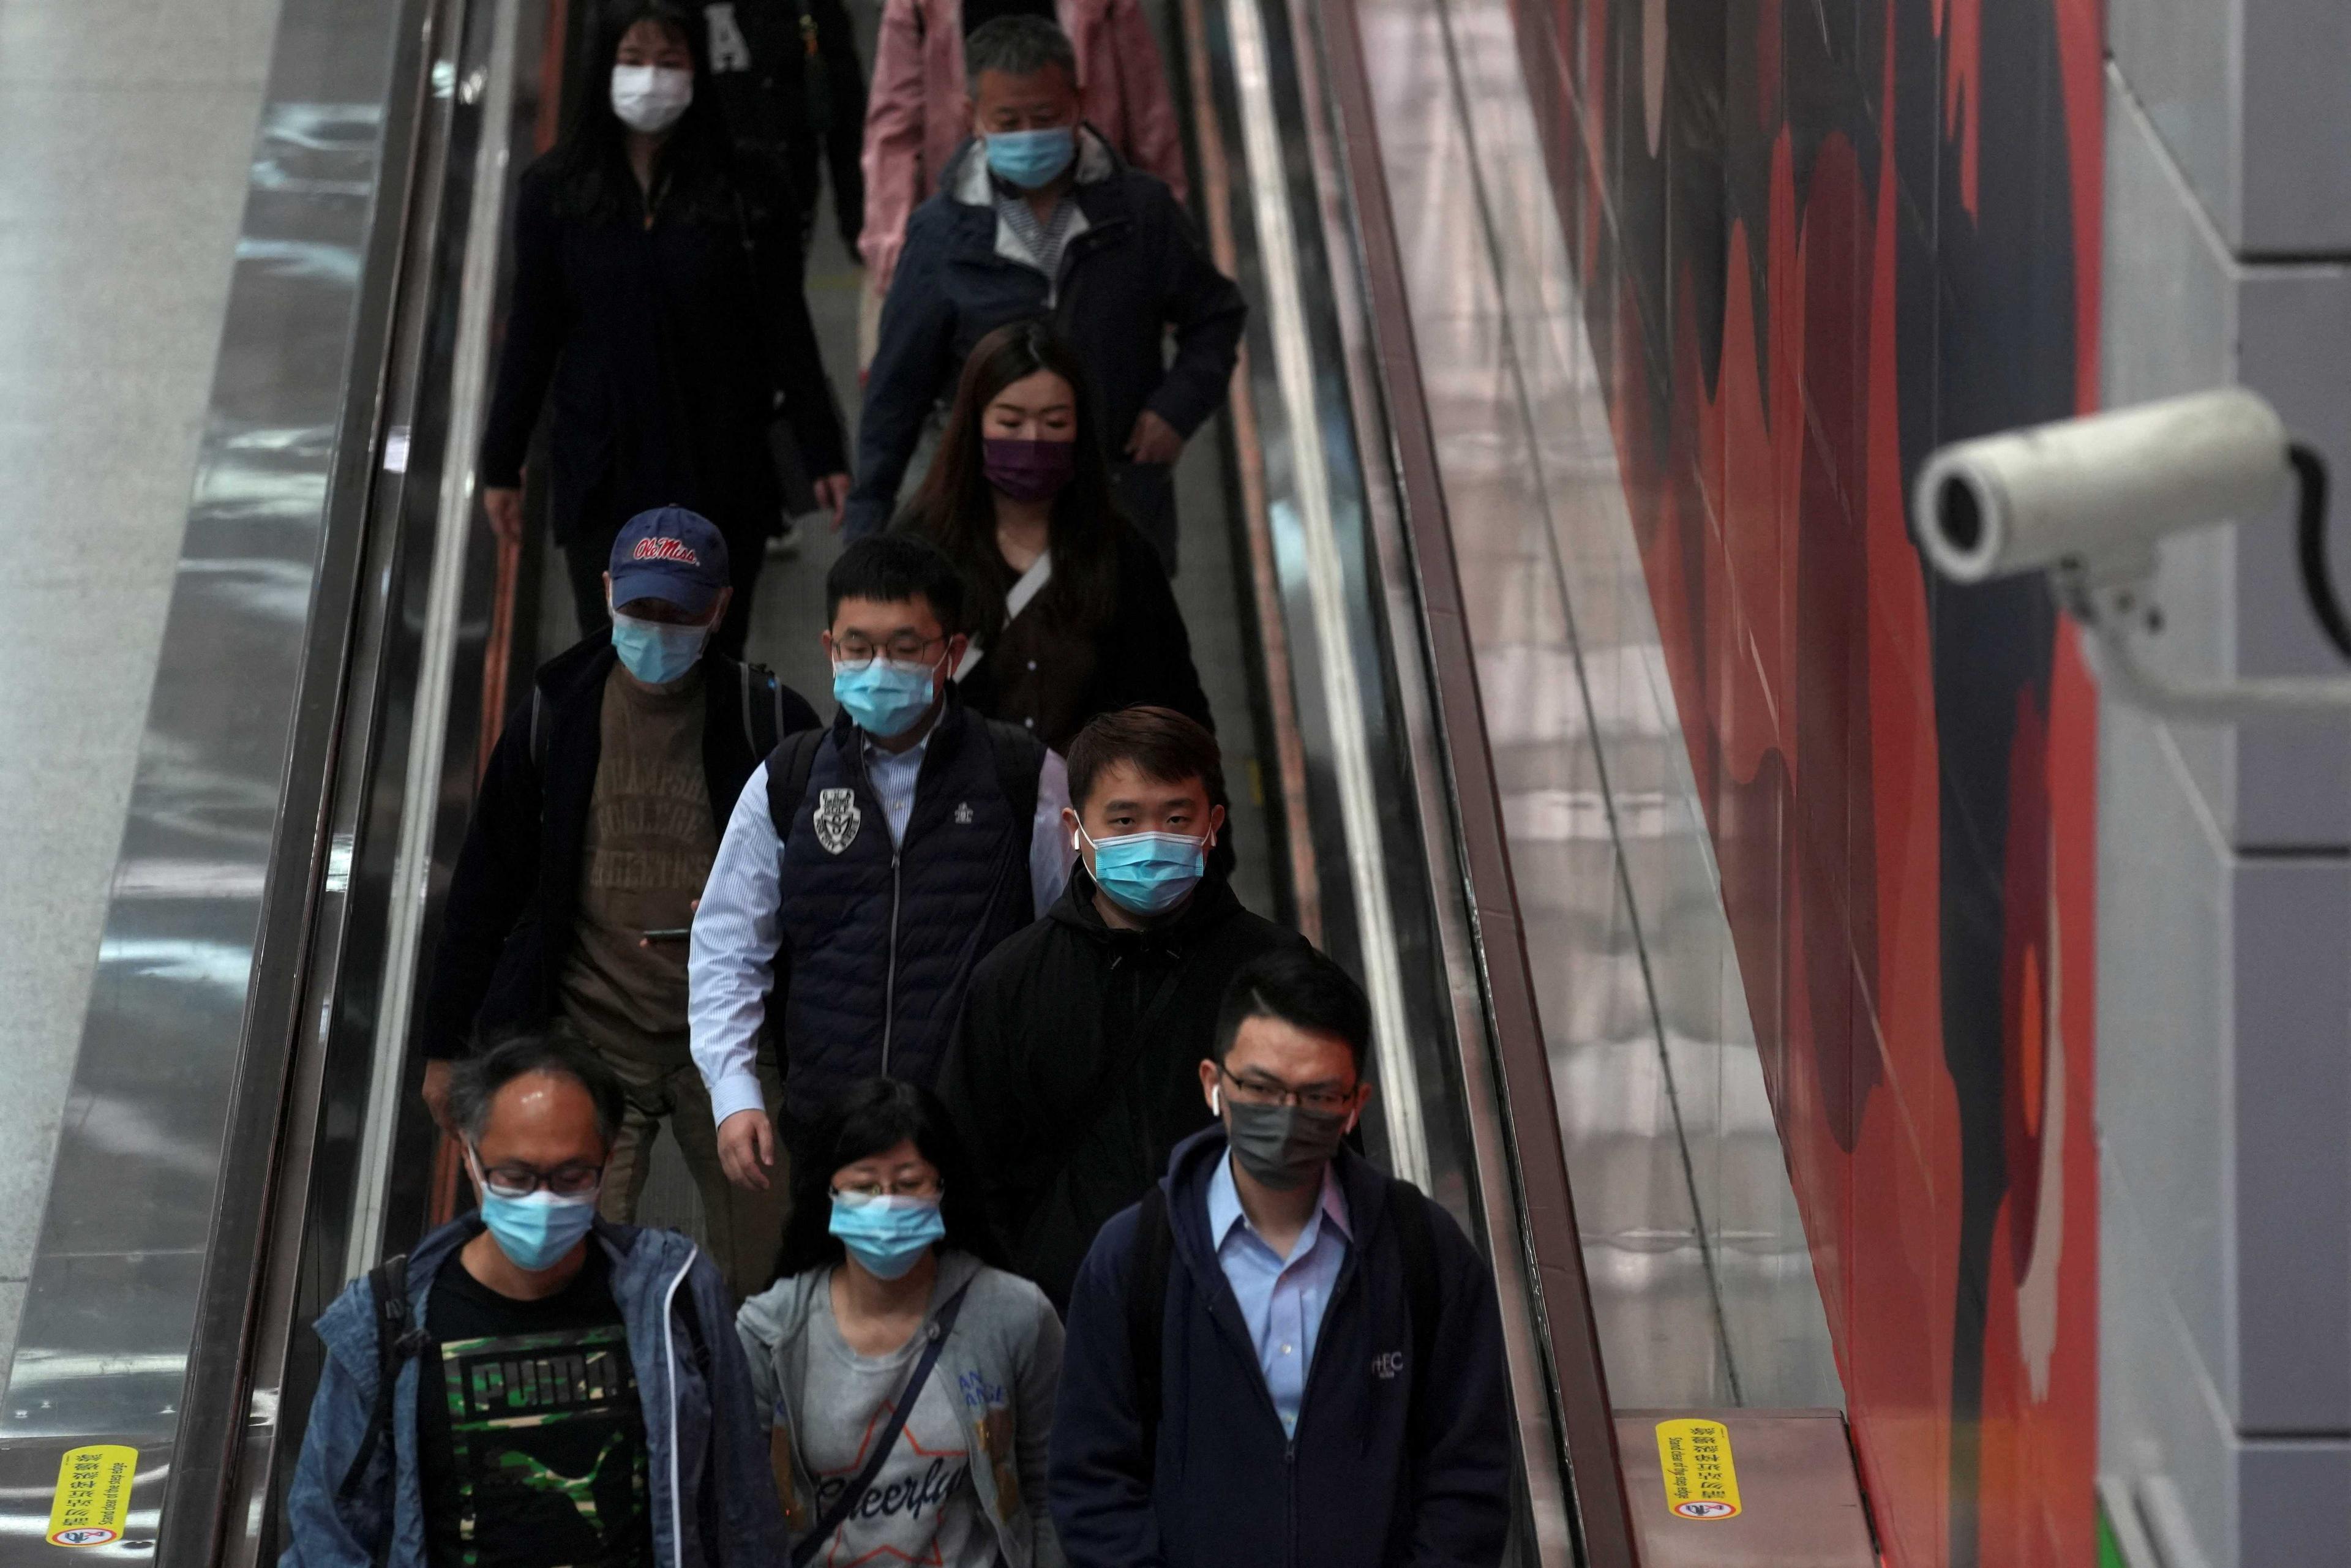 Passengers wearing masks to prevent the spread of Covid-19, walk at a subway station in Hong Kong, China Dec 1, 2021. Photo: Reuters